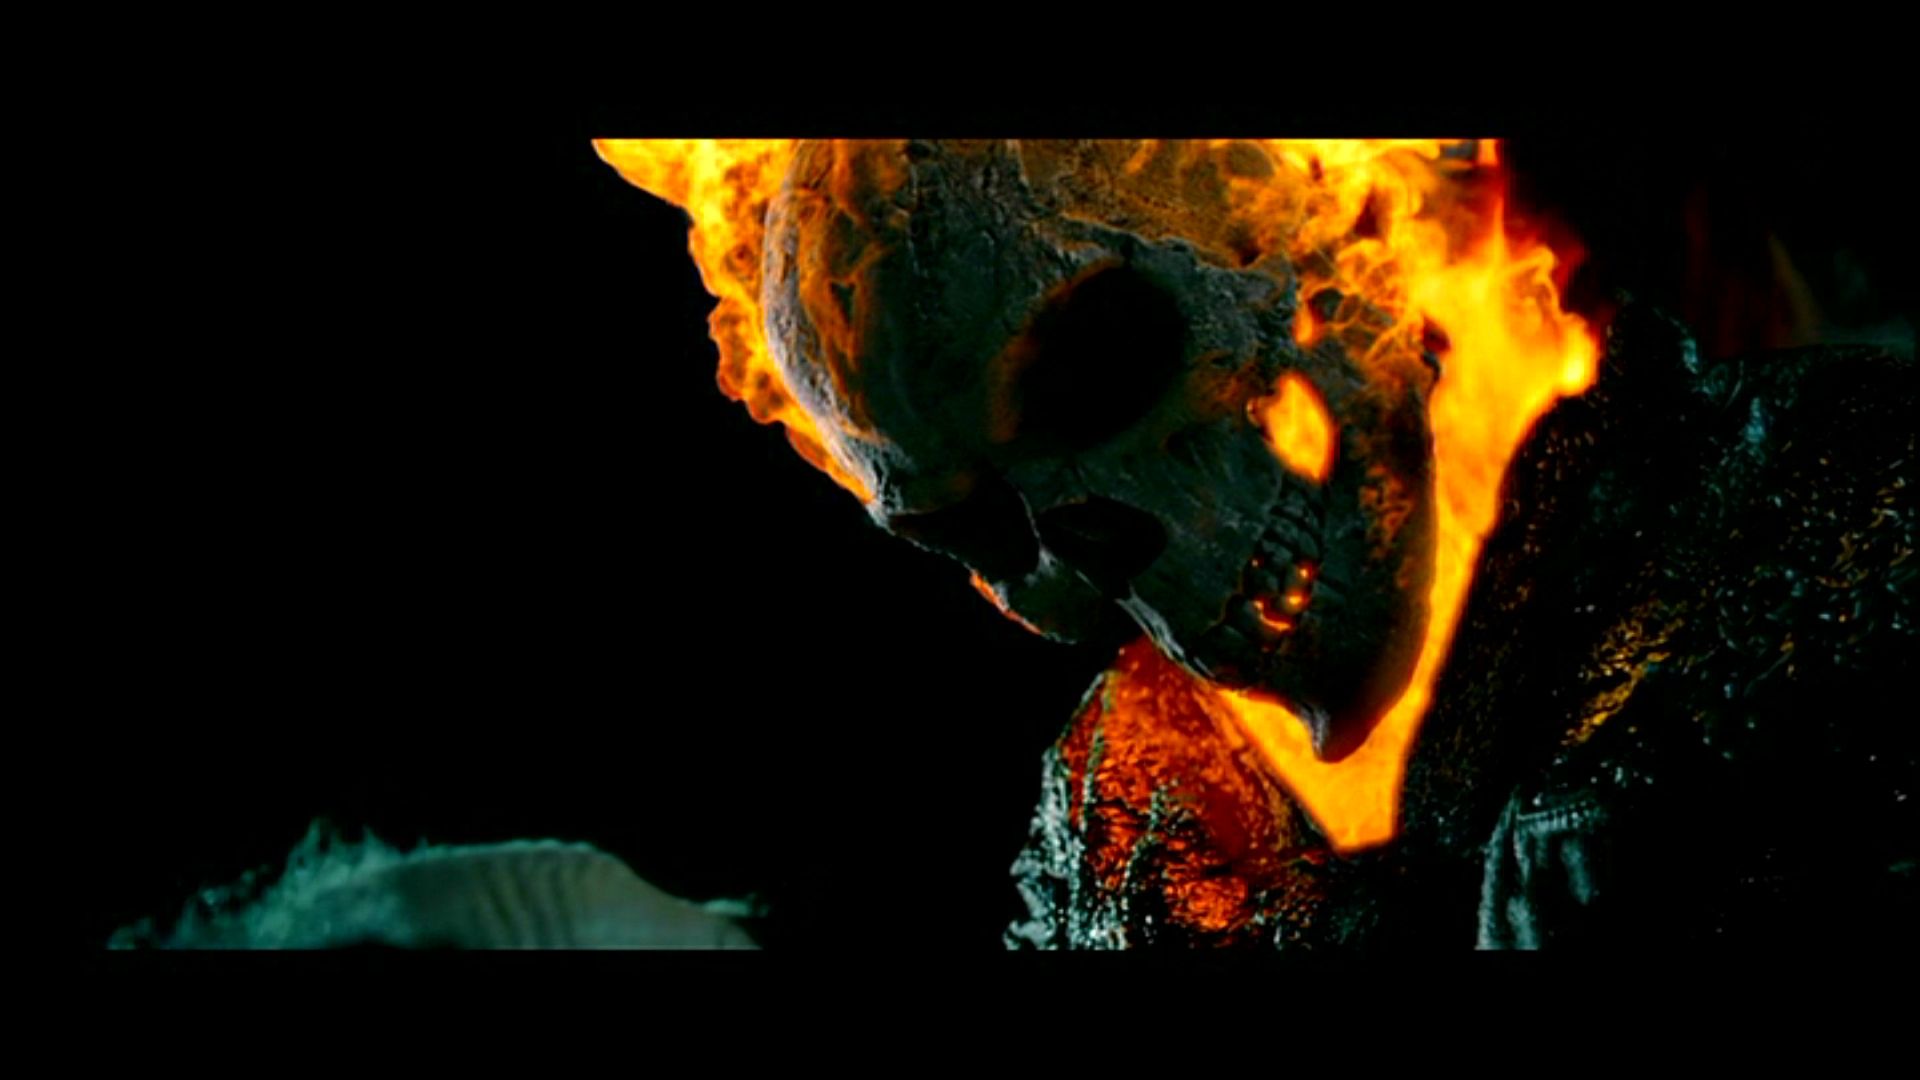 Ghost rider 2 full movie in hindi download hd